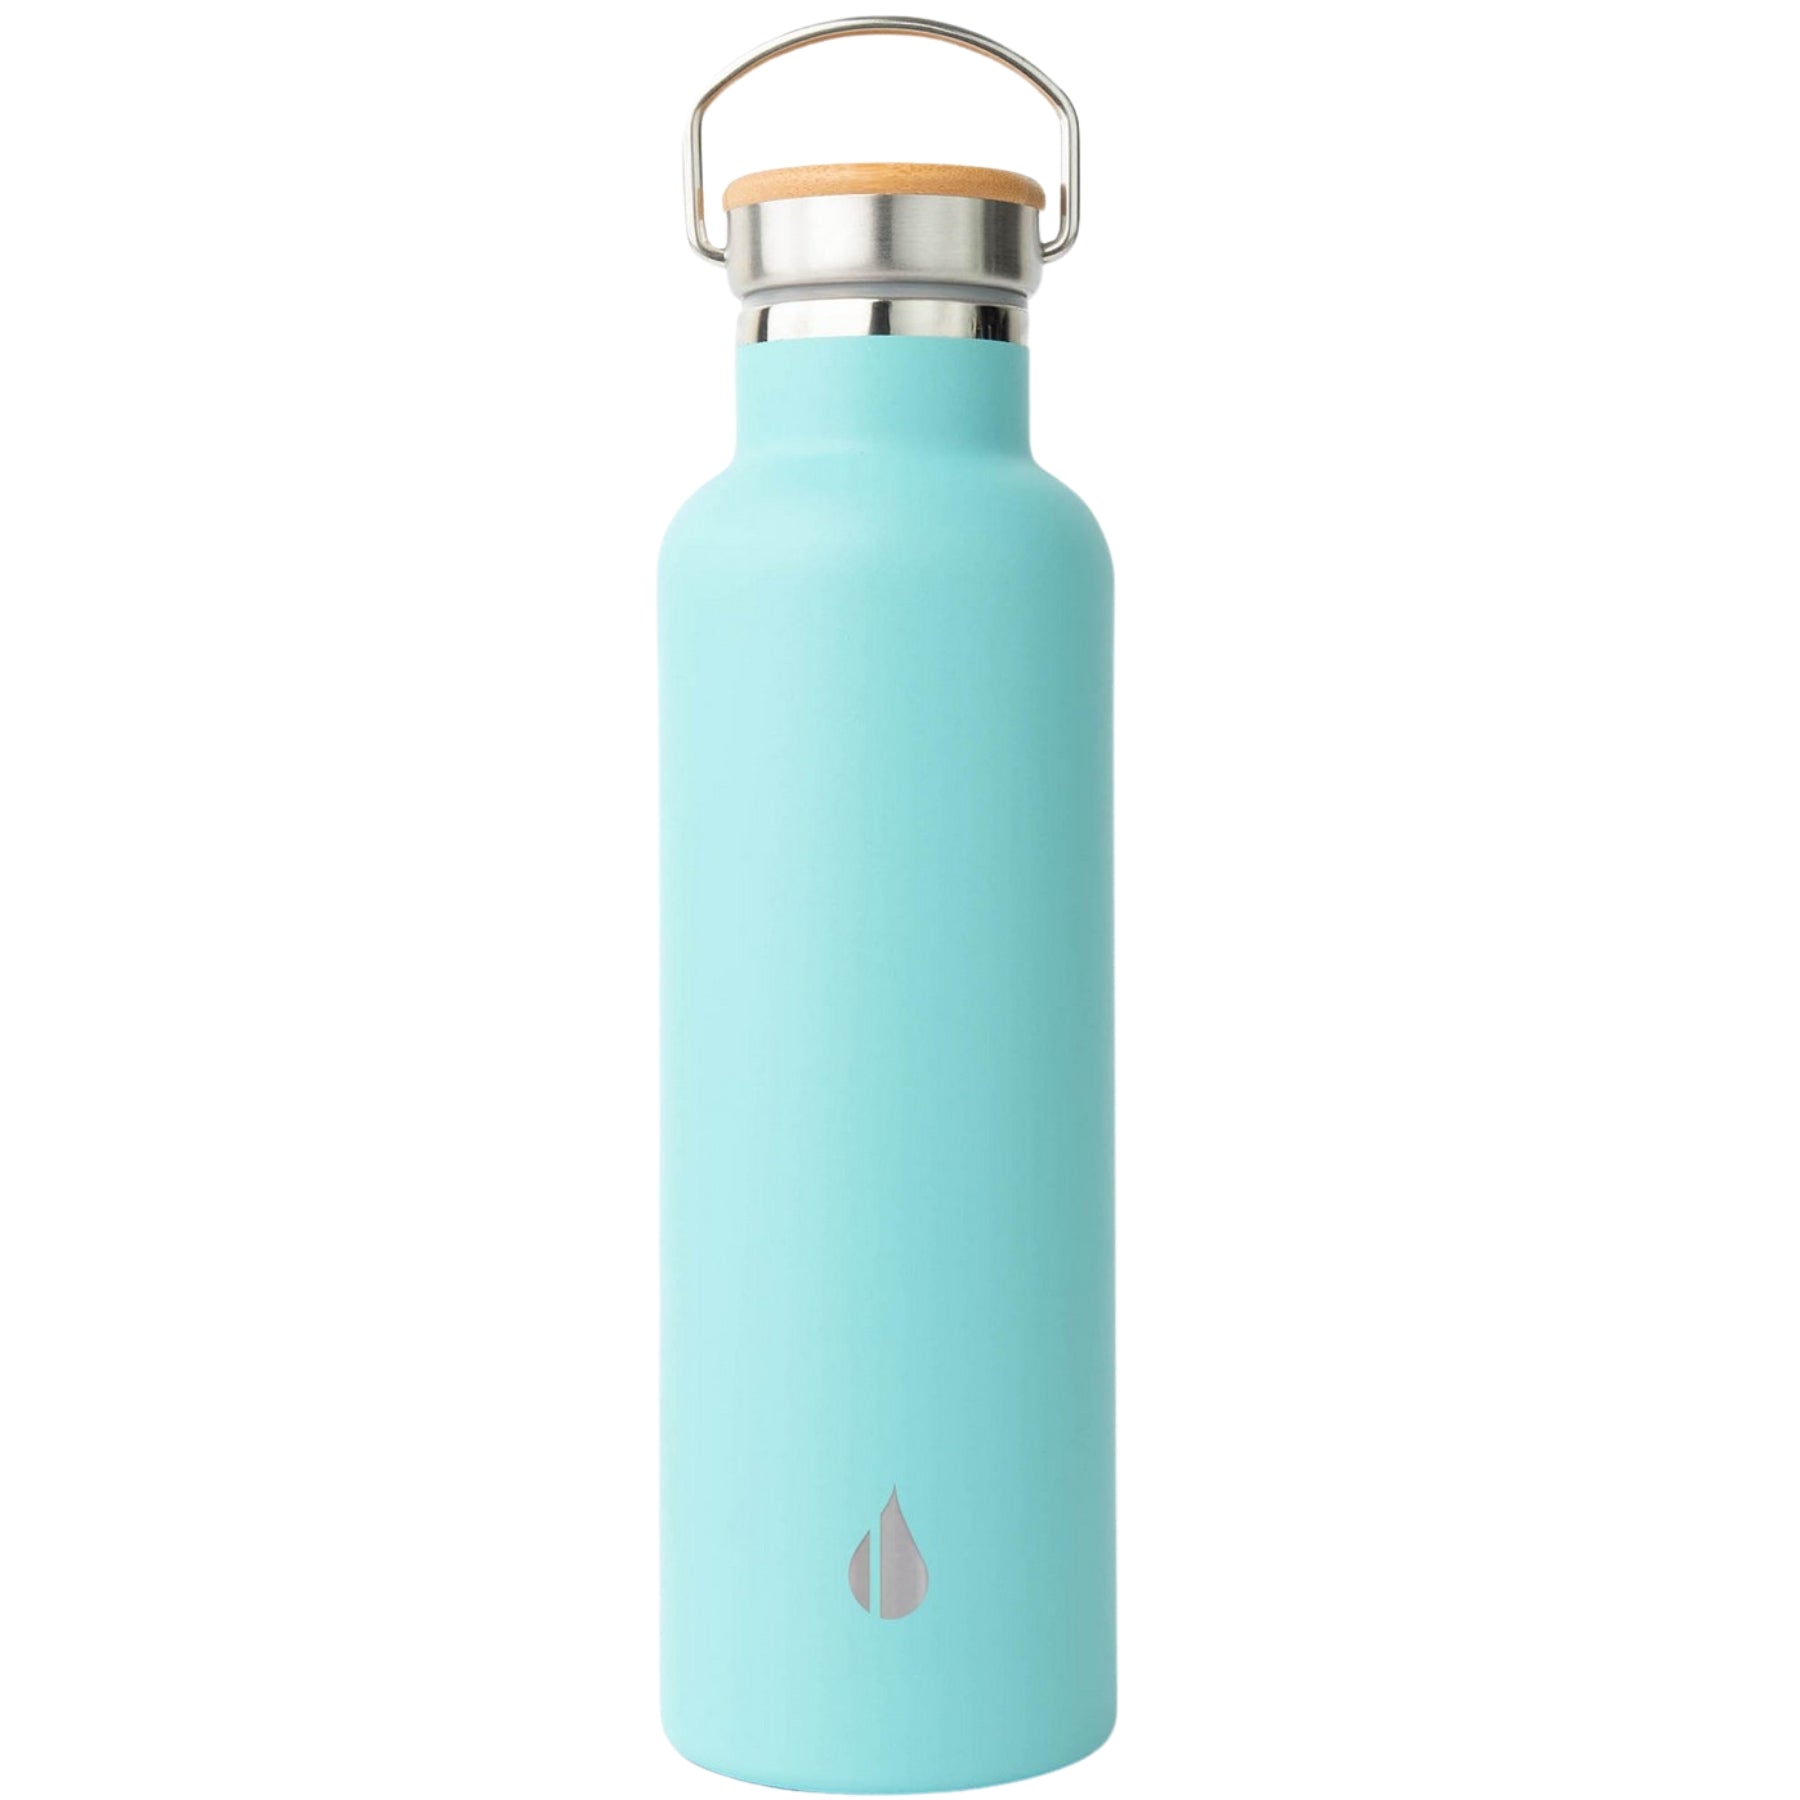 Customizable Elemental® 25 oz Stainless Steel Insulated Bottle in robins egg